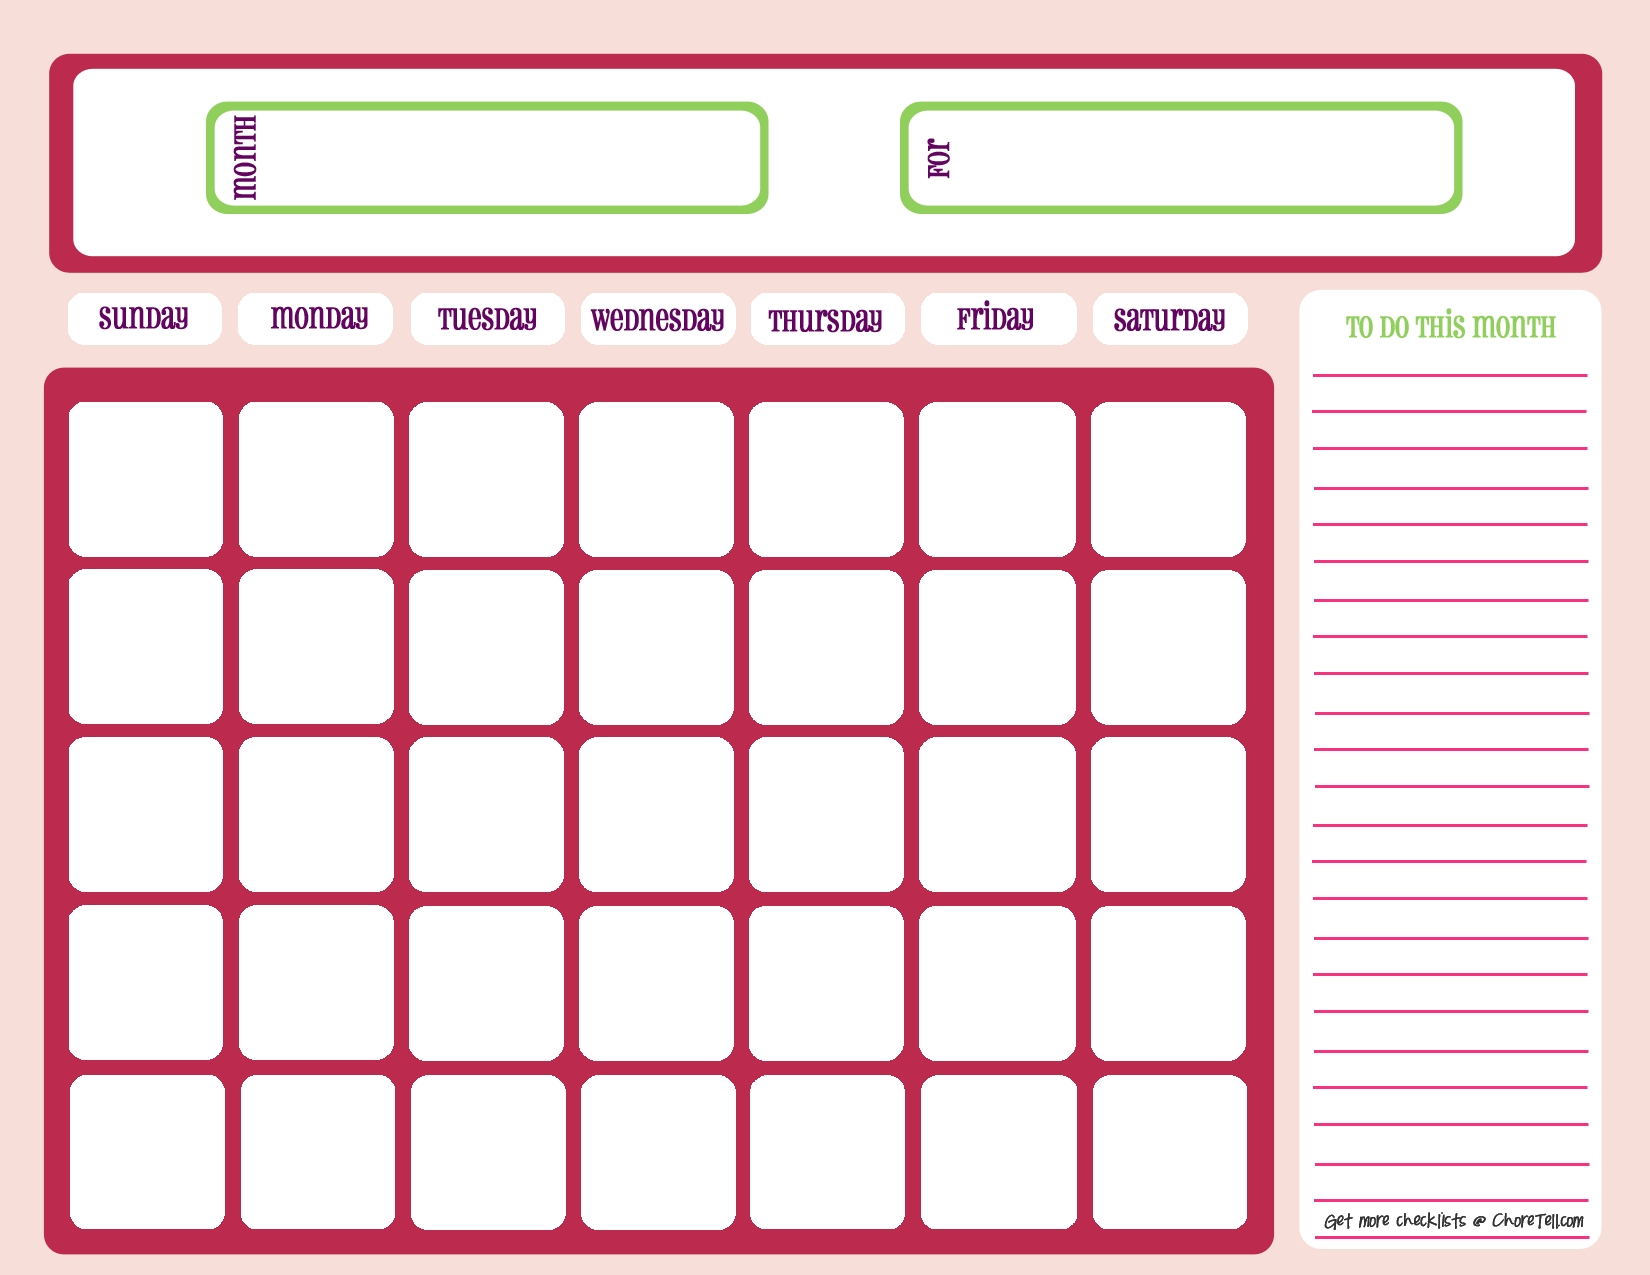 Blank Month Calendar - Pinks - Free Printable Downloads From Choretell within Monthly Calendars To Print Colorful